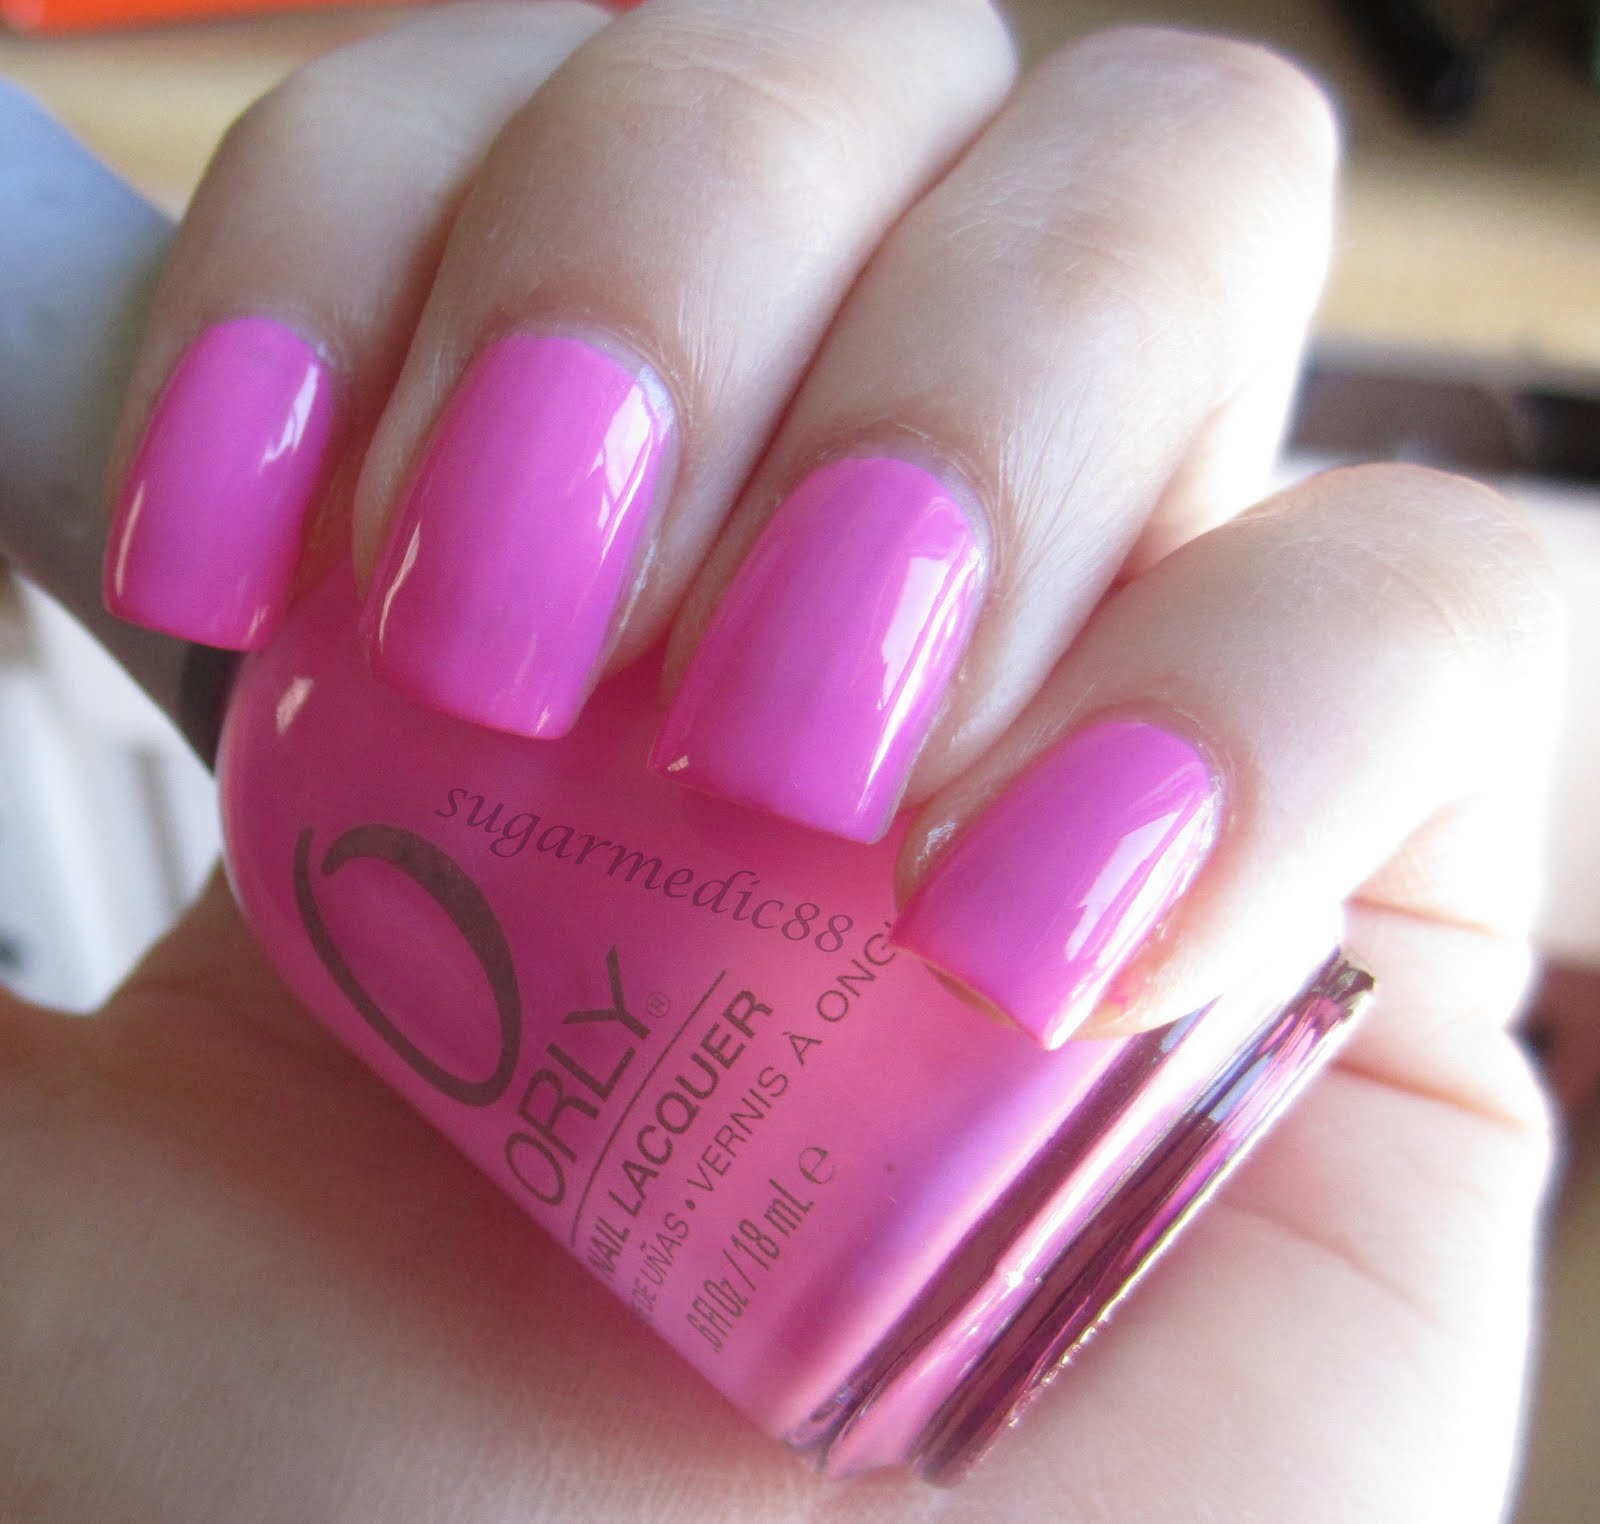 The Polished Medic: Orly Fancy Fuchsia - the perfect Barbie pink